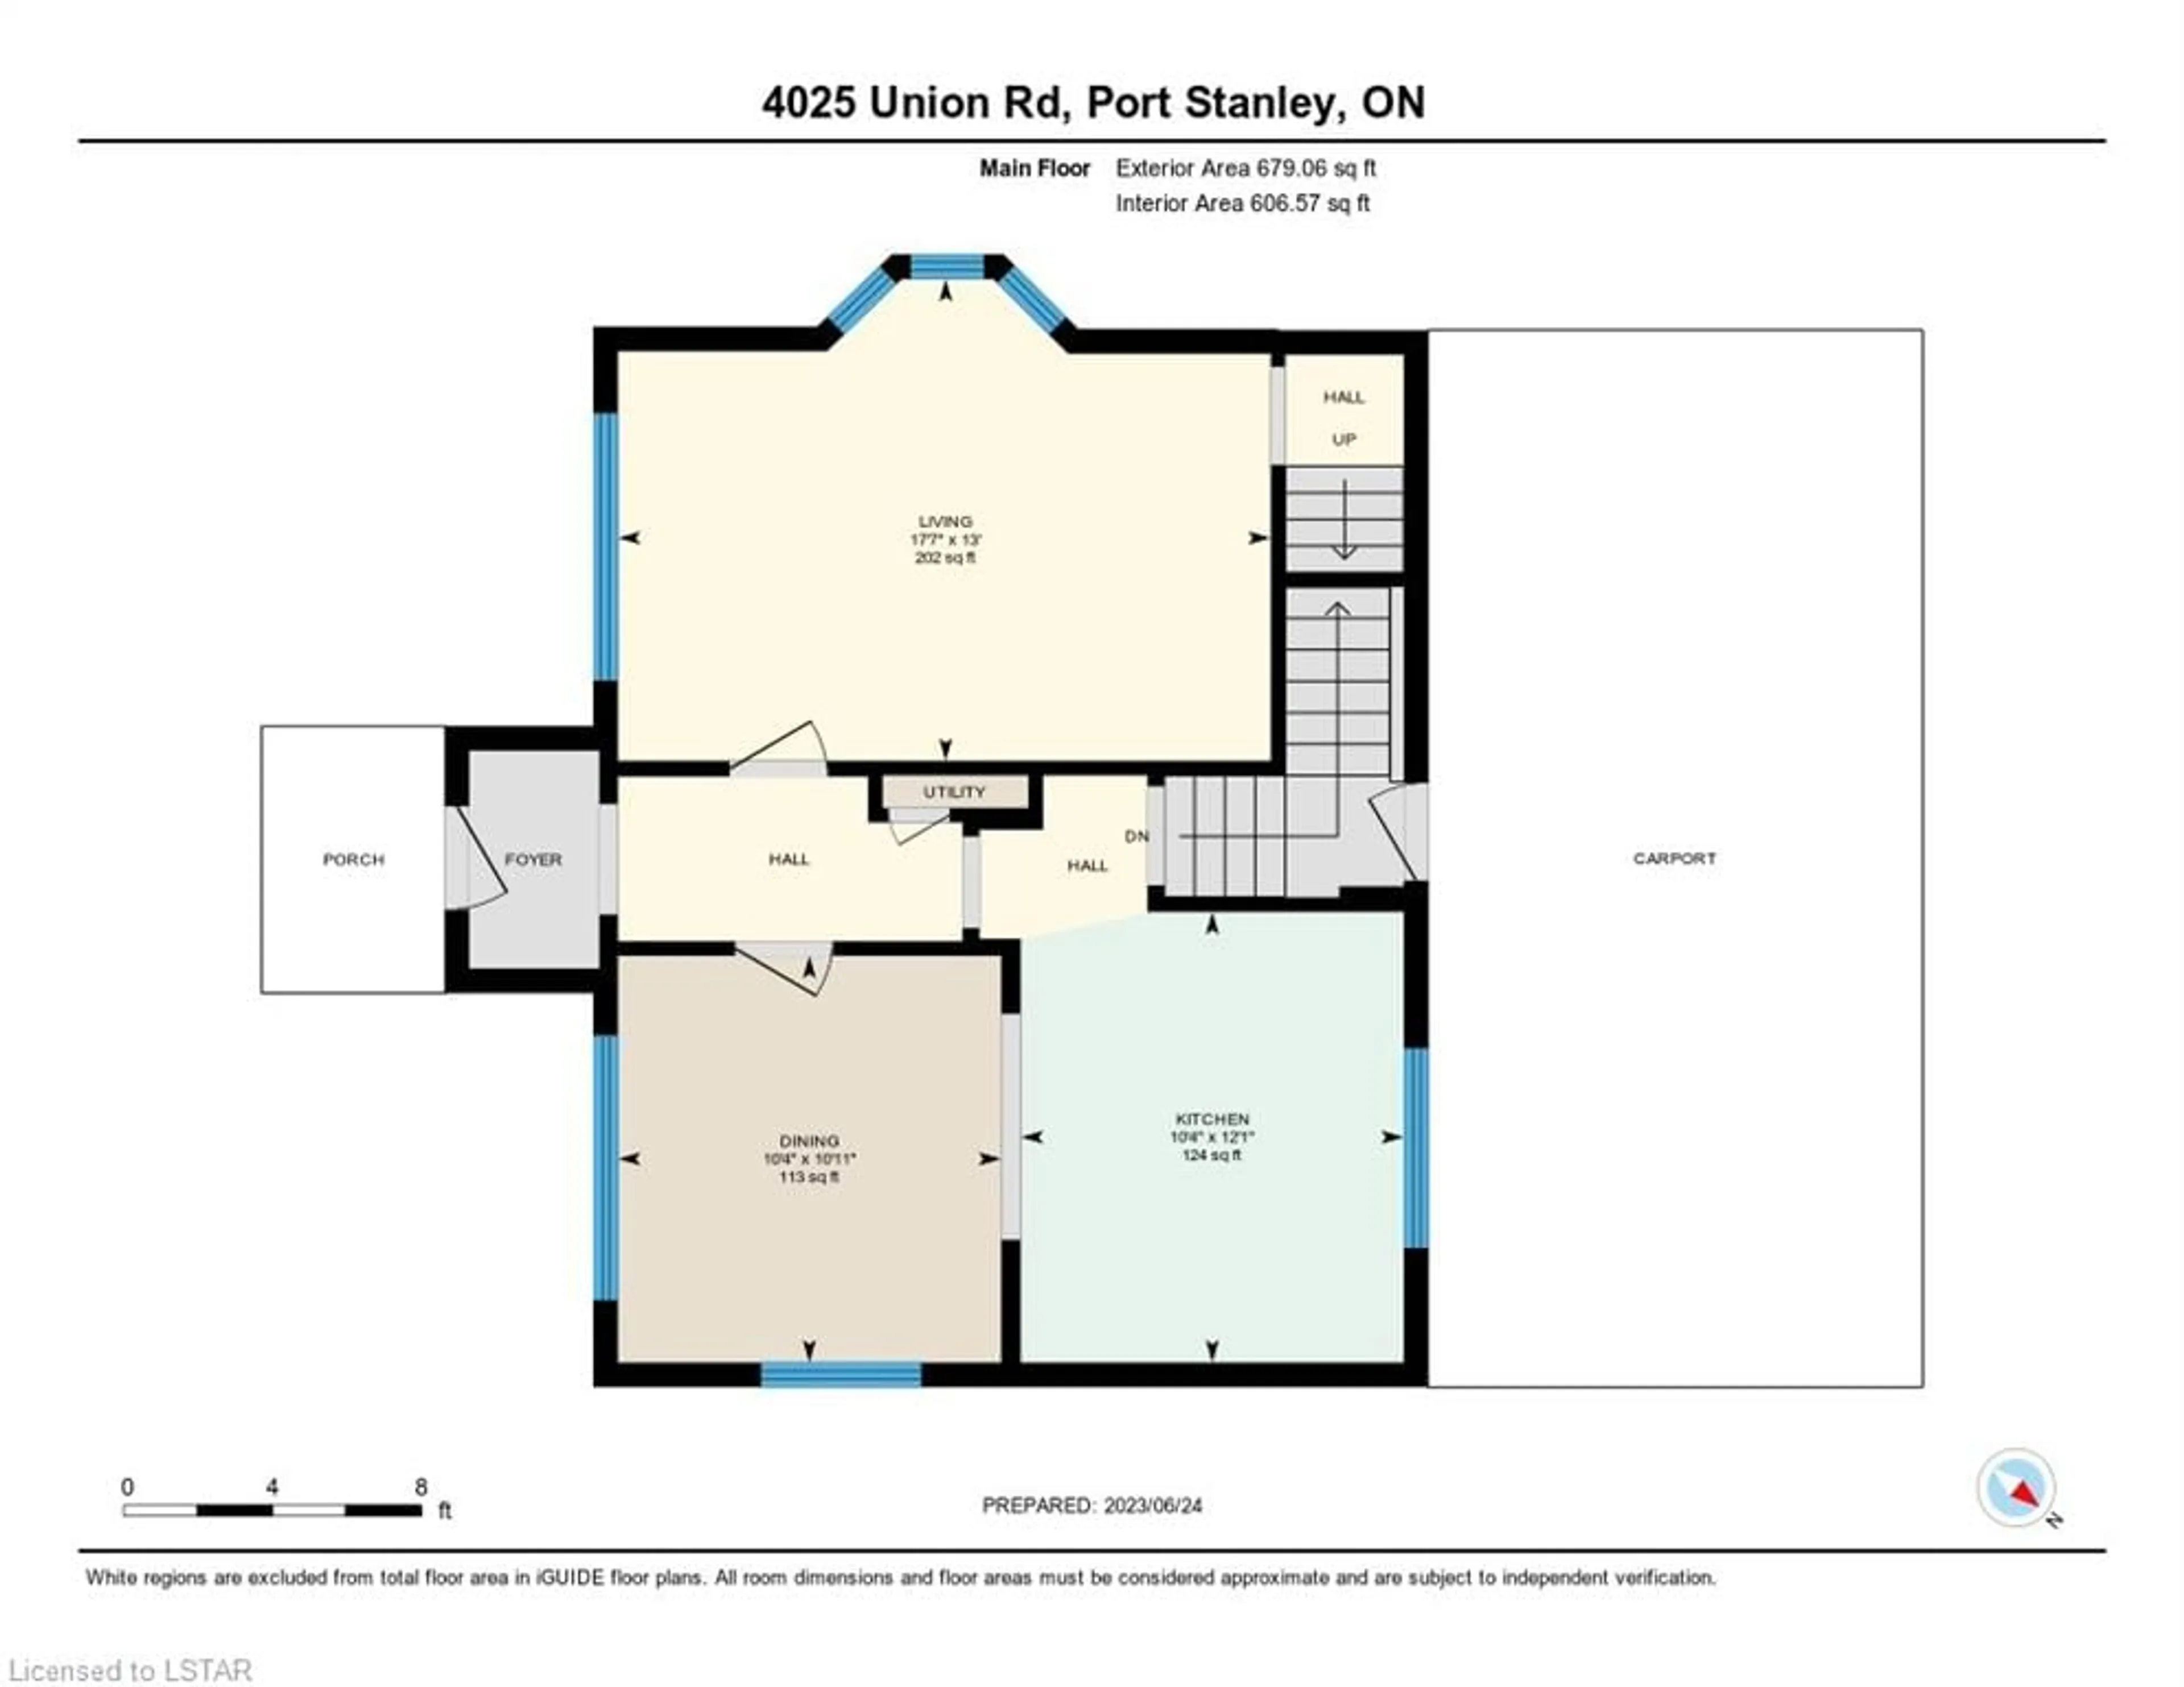 Floor plan for 4025 Union Rd, Southwold Ontario N5L 1J2